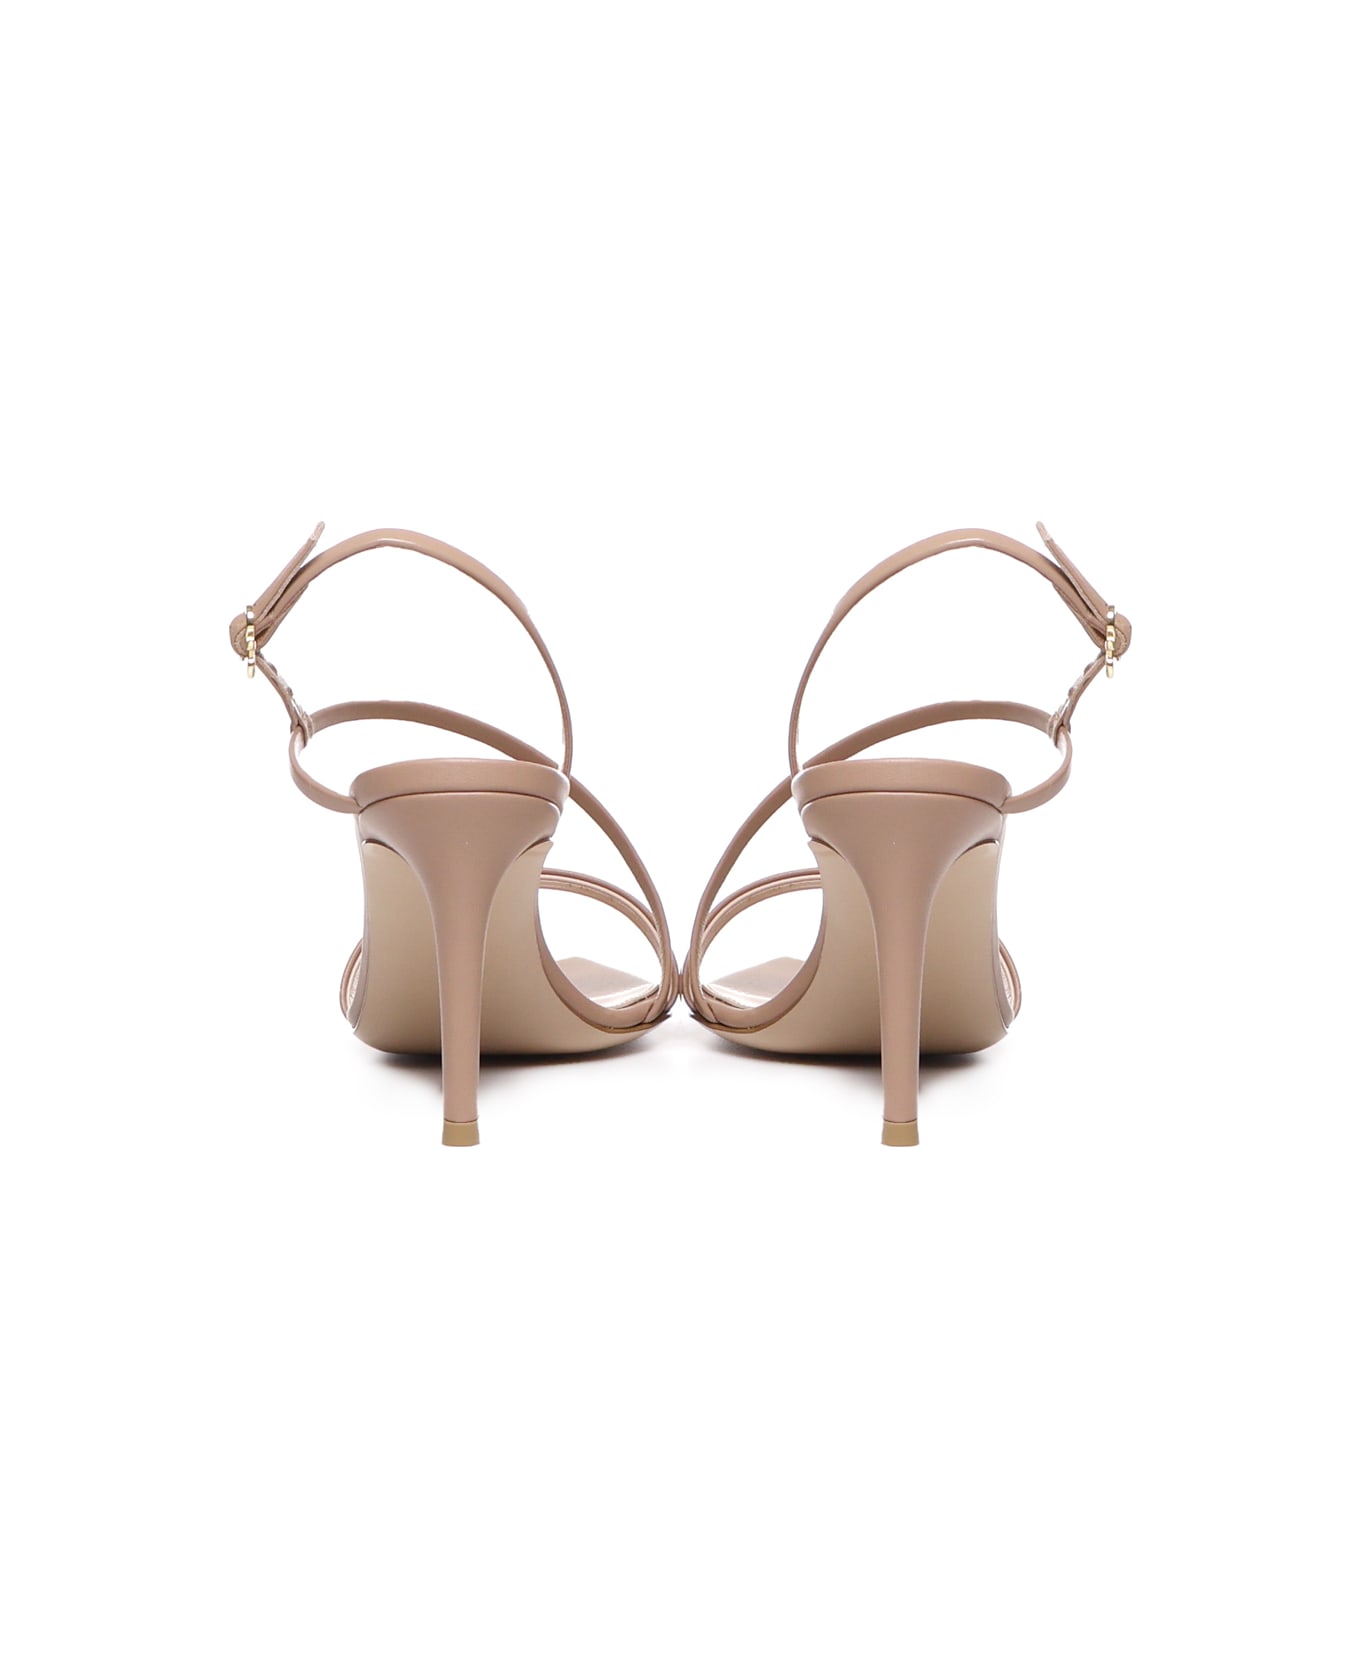 Gianvito Rossi Calfskin Sandals With Pointed Toe - Praline サンダル